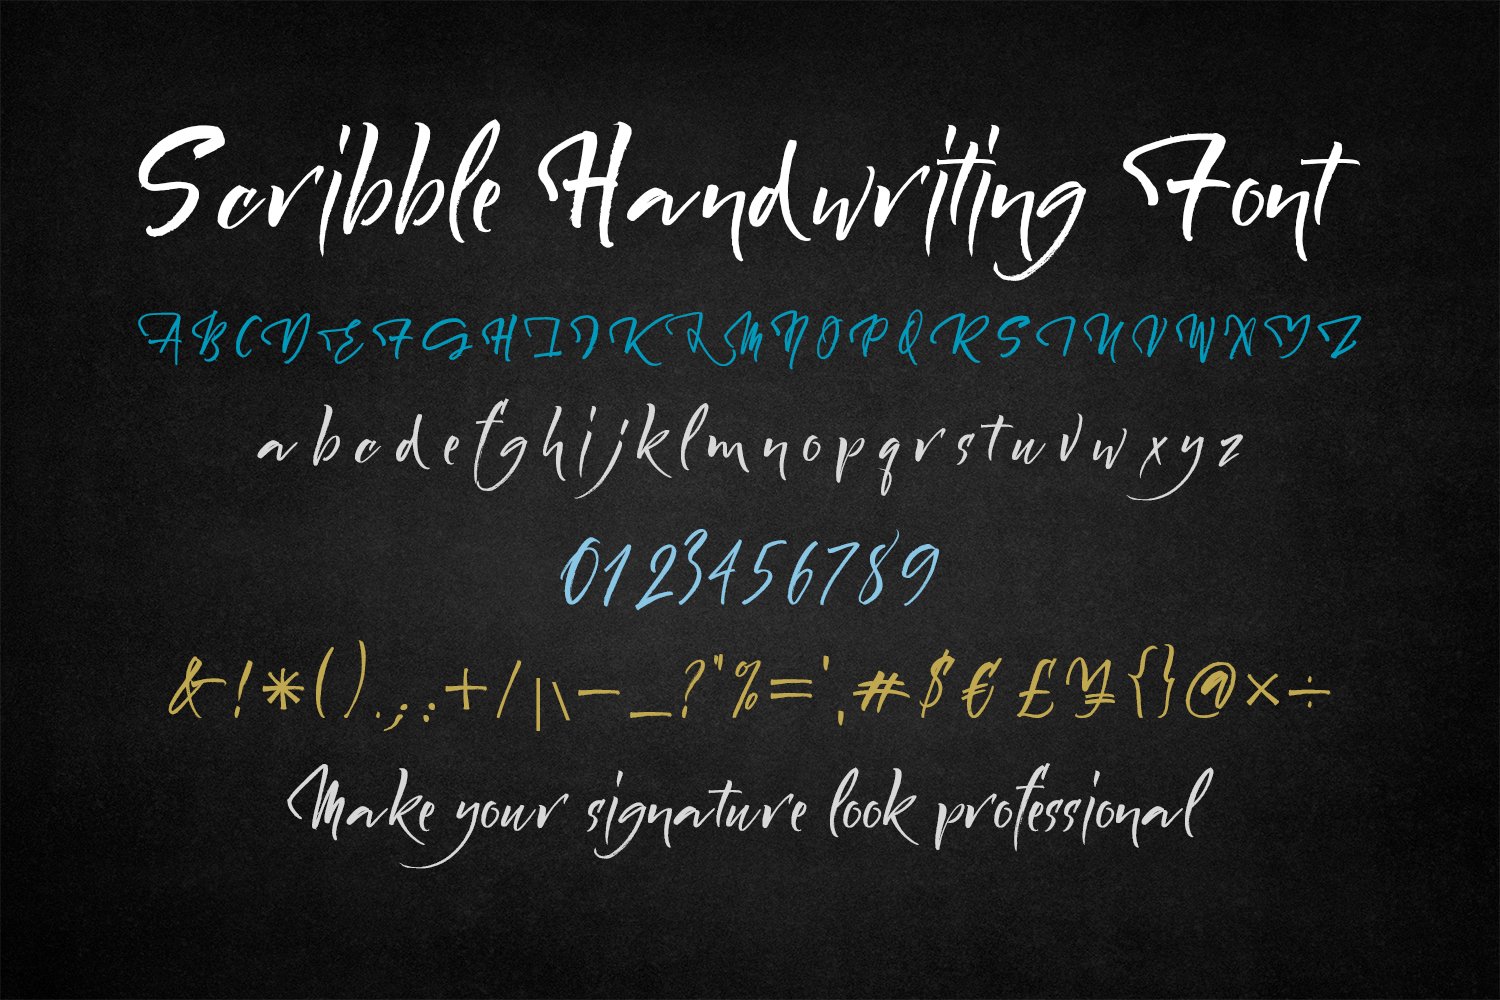 Scribble Font cover image.